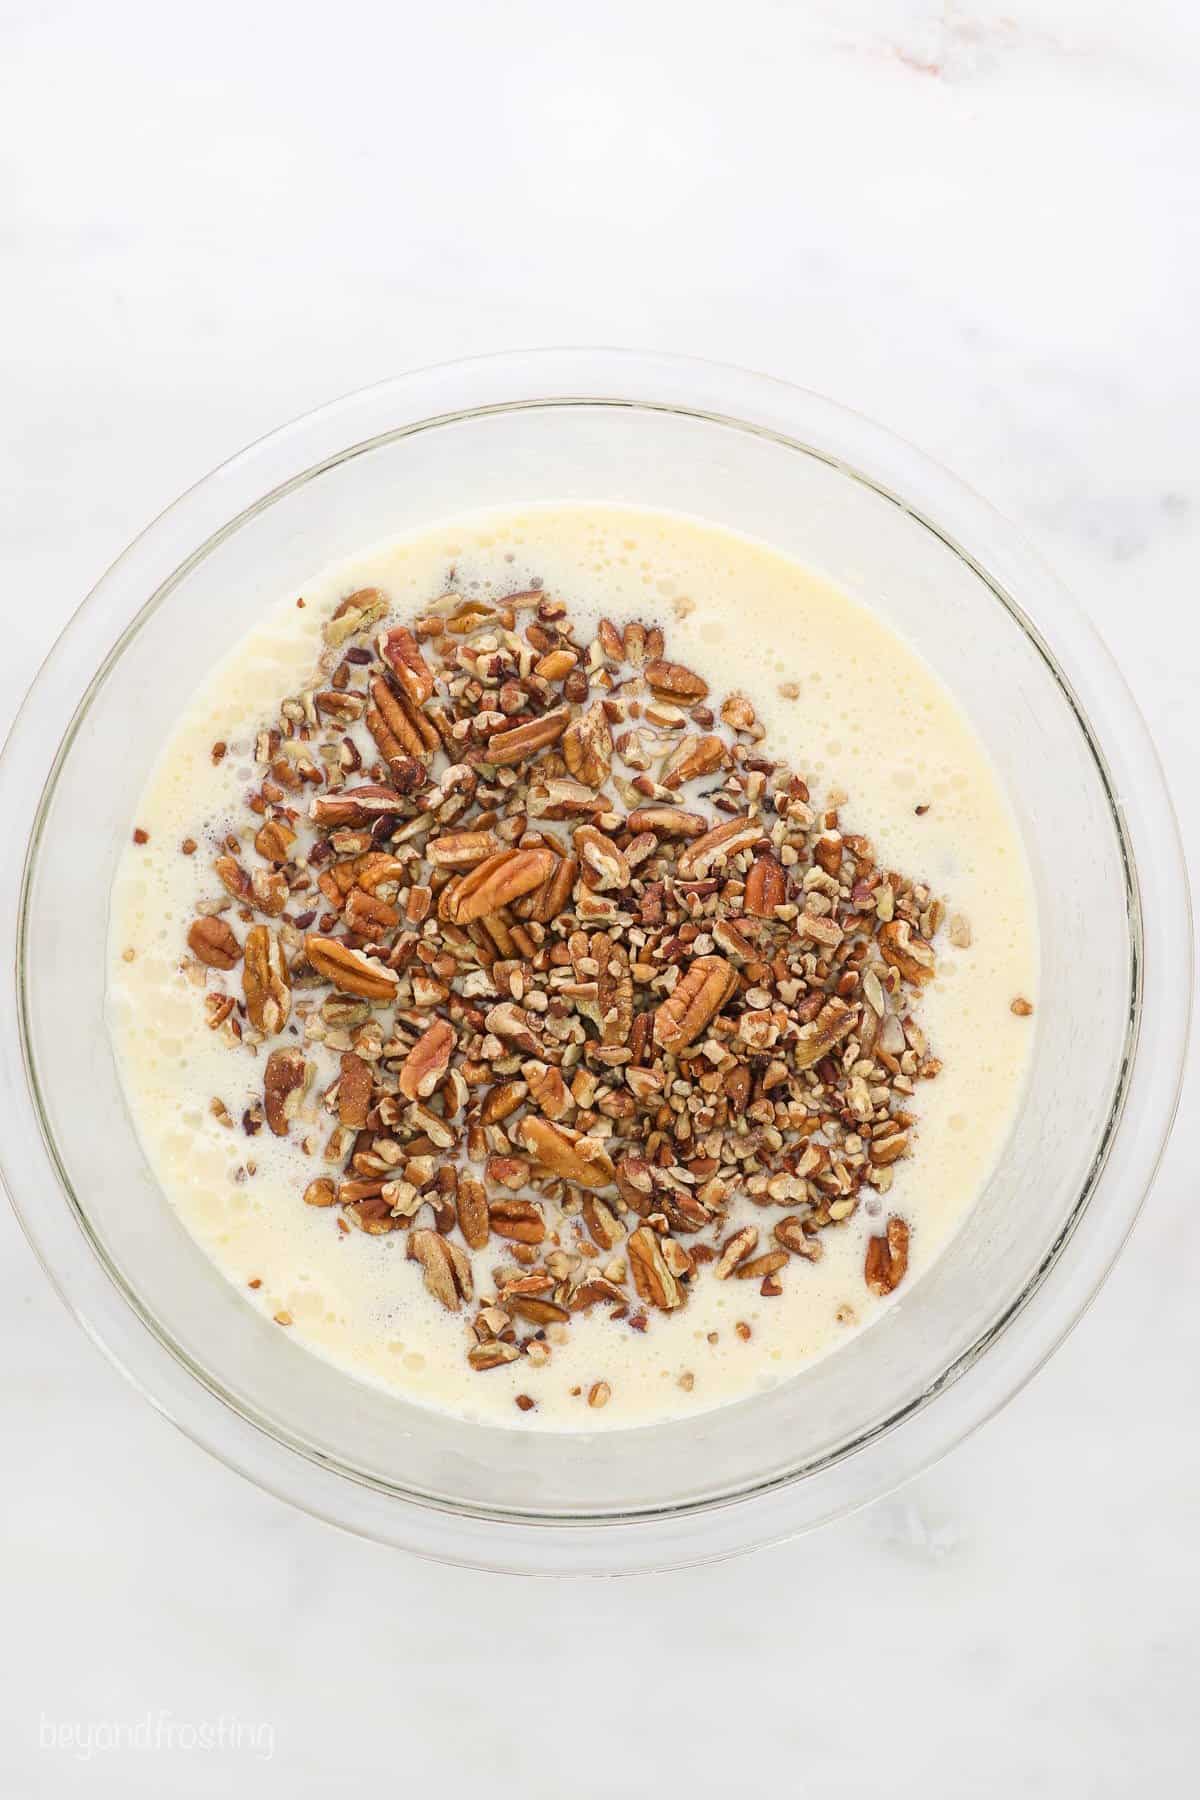 A glass bowl full of the combined filling with chopped pecans poured on top